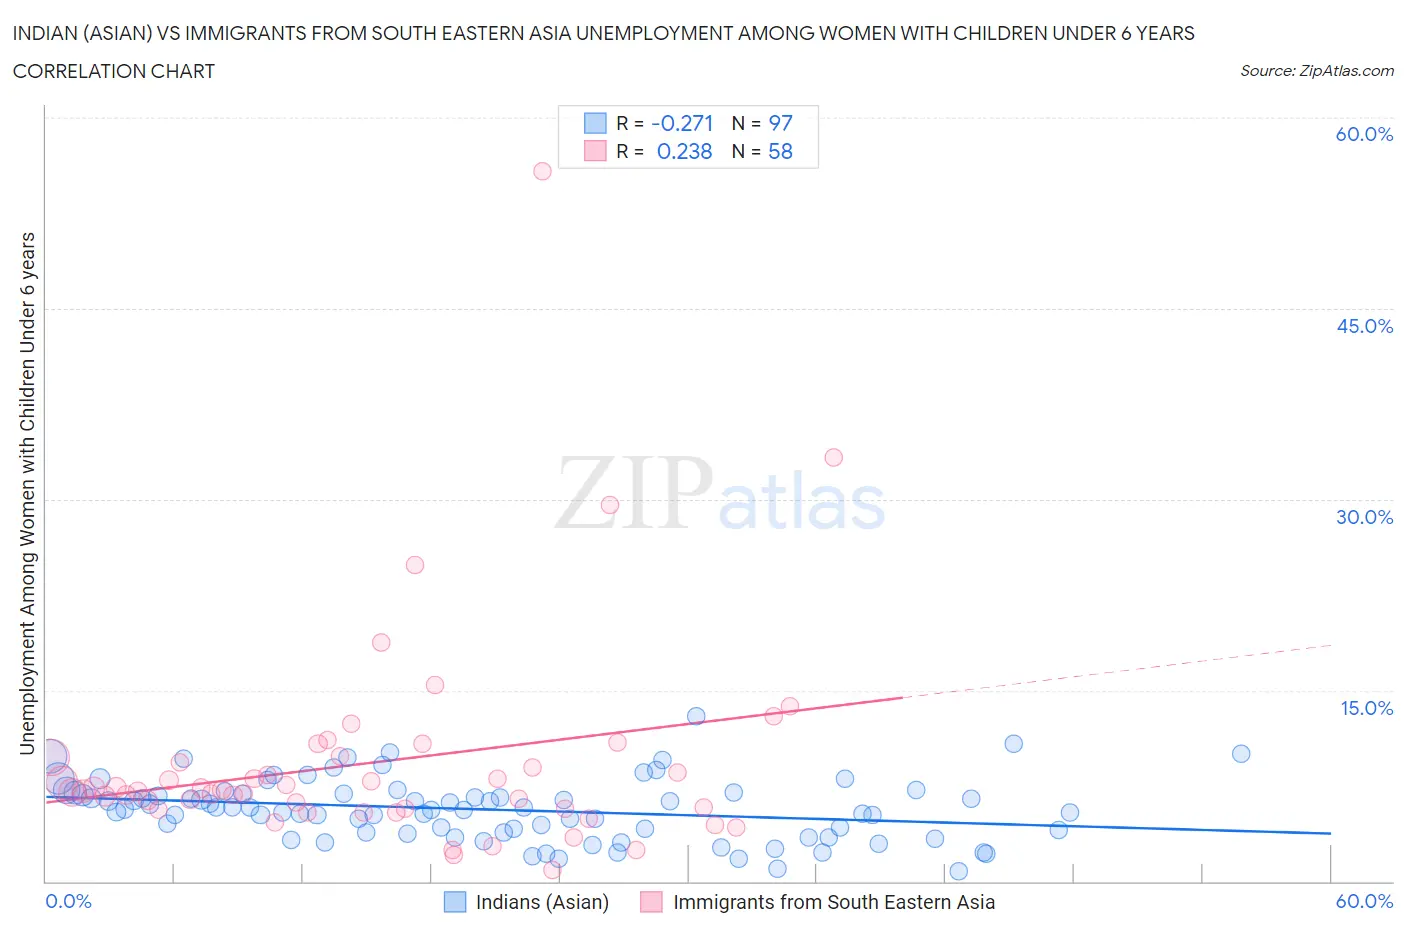 Indian (Asian) vs Immigrants from South Eastern Asia Unemployment Among Women with Children Under 6 years